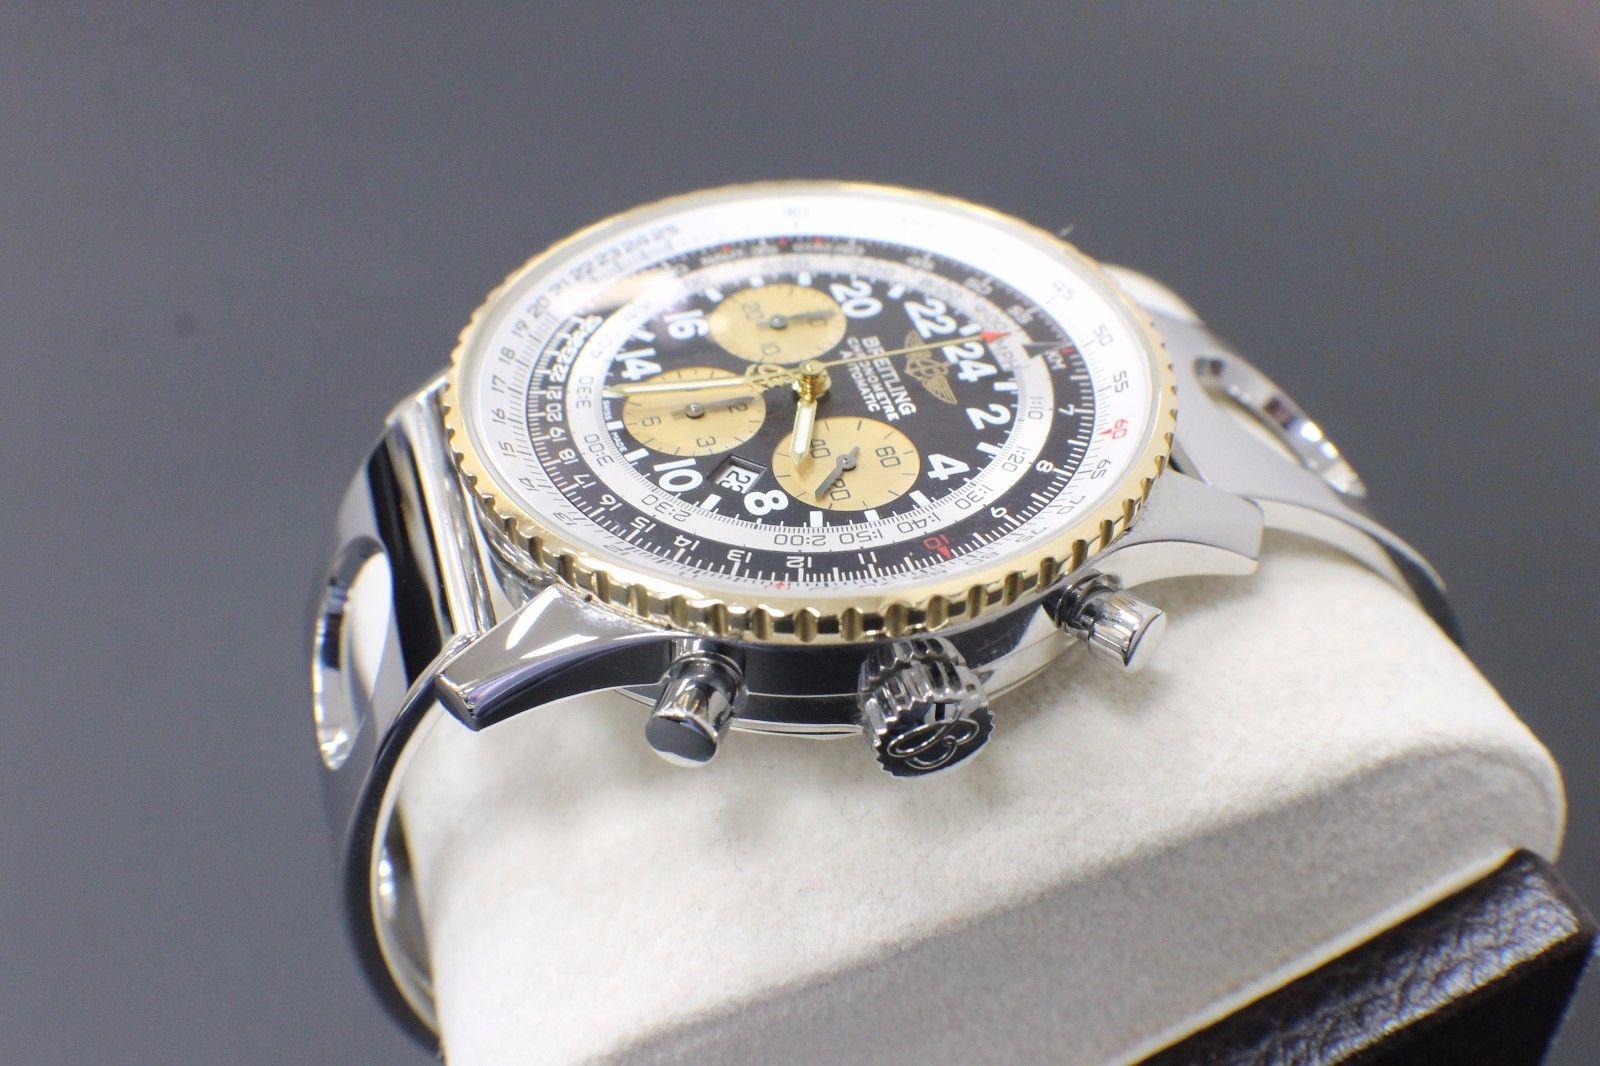 Style Number: D22322 

Model: Navitimer Cosmonaute

Case Material: Stainless Steel 

Band: Stainless Steel

Bezel: Stainless Steel & 18K Yellow Gold 

Dial: Black

Face: Sapphire Crystal 

Case Size: 43mm

Includes: 

-Elegant Watch Box

-Breitling